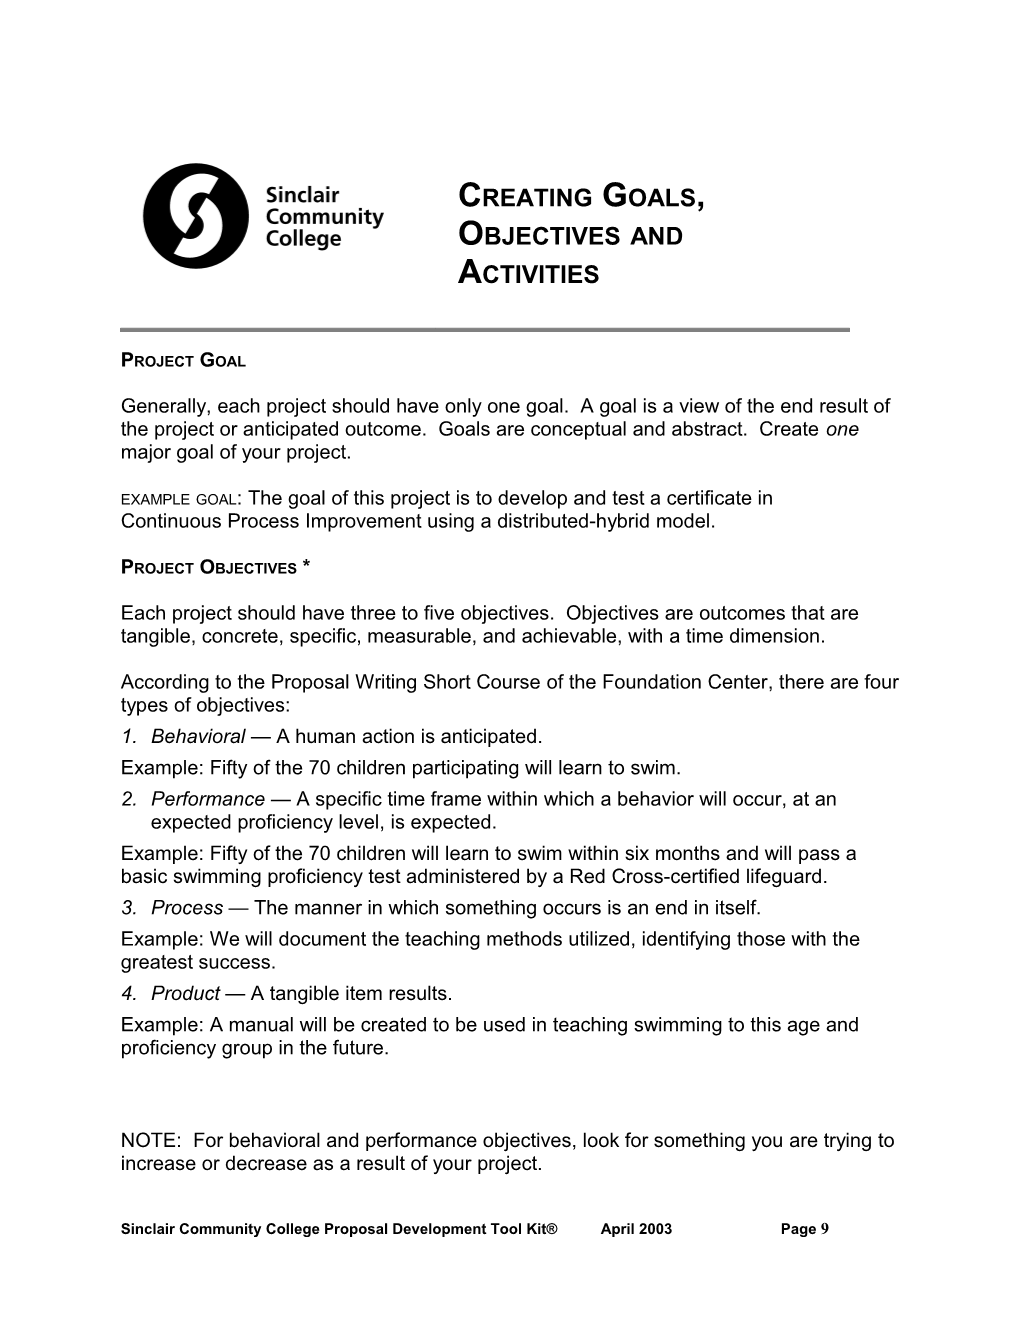 Creating Goals, Objectives, and Activities